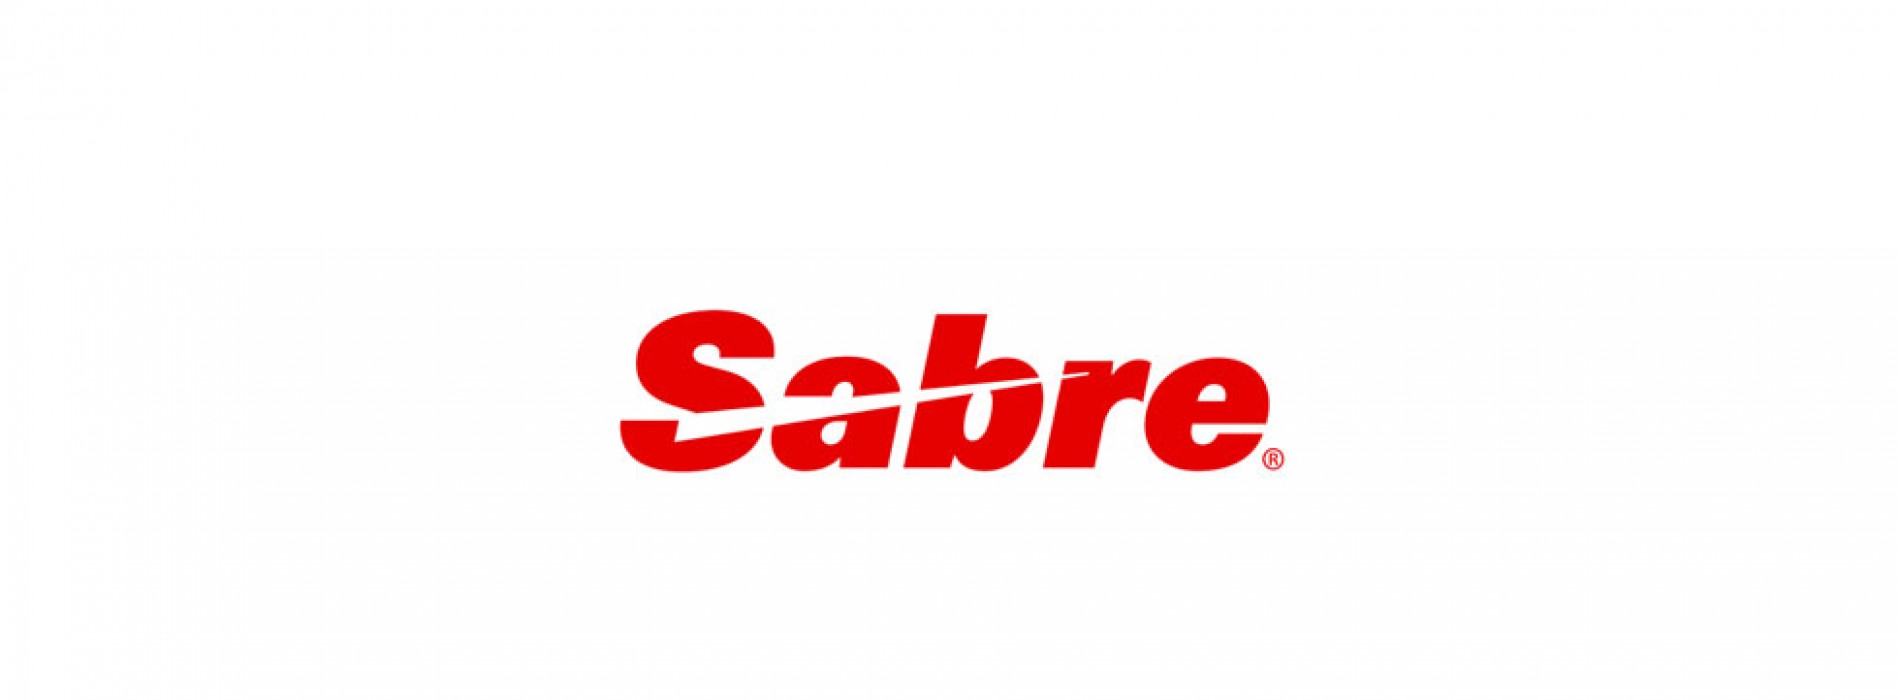 Sabre’s flight planning technology adopted by LATAM Airlines Group to streamline operations